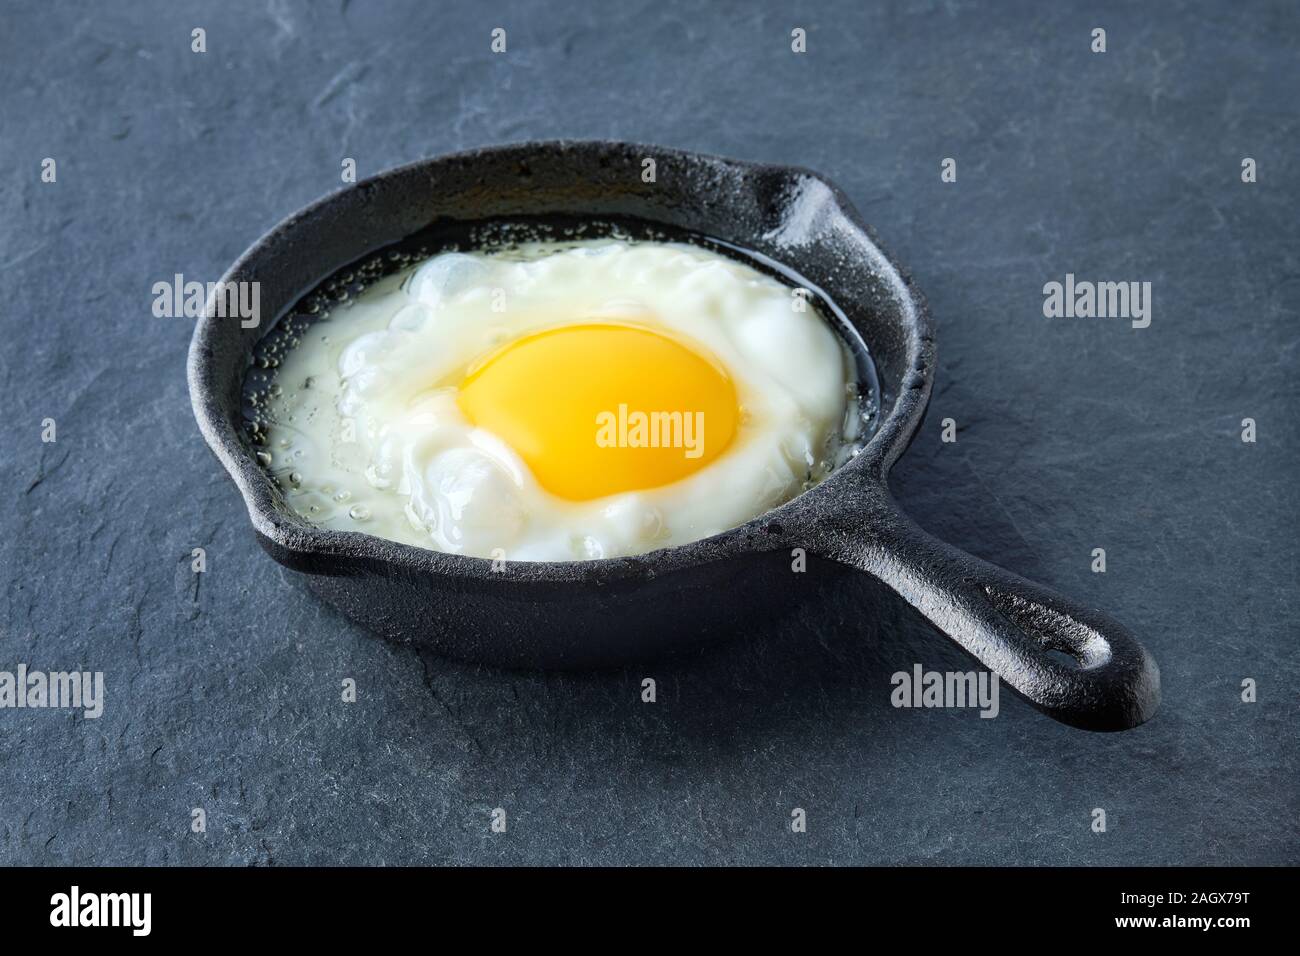 https://c8.alamy.com/comp/2AGX79T/scrambled-egg-in-small-cast-iron-skillet-making-omelet-eggs-2AGX79T.jpg